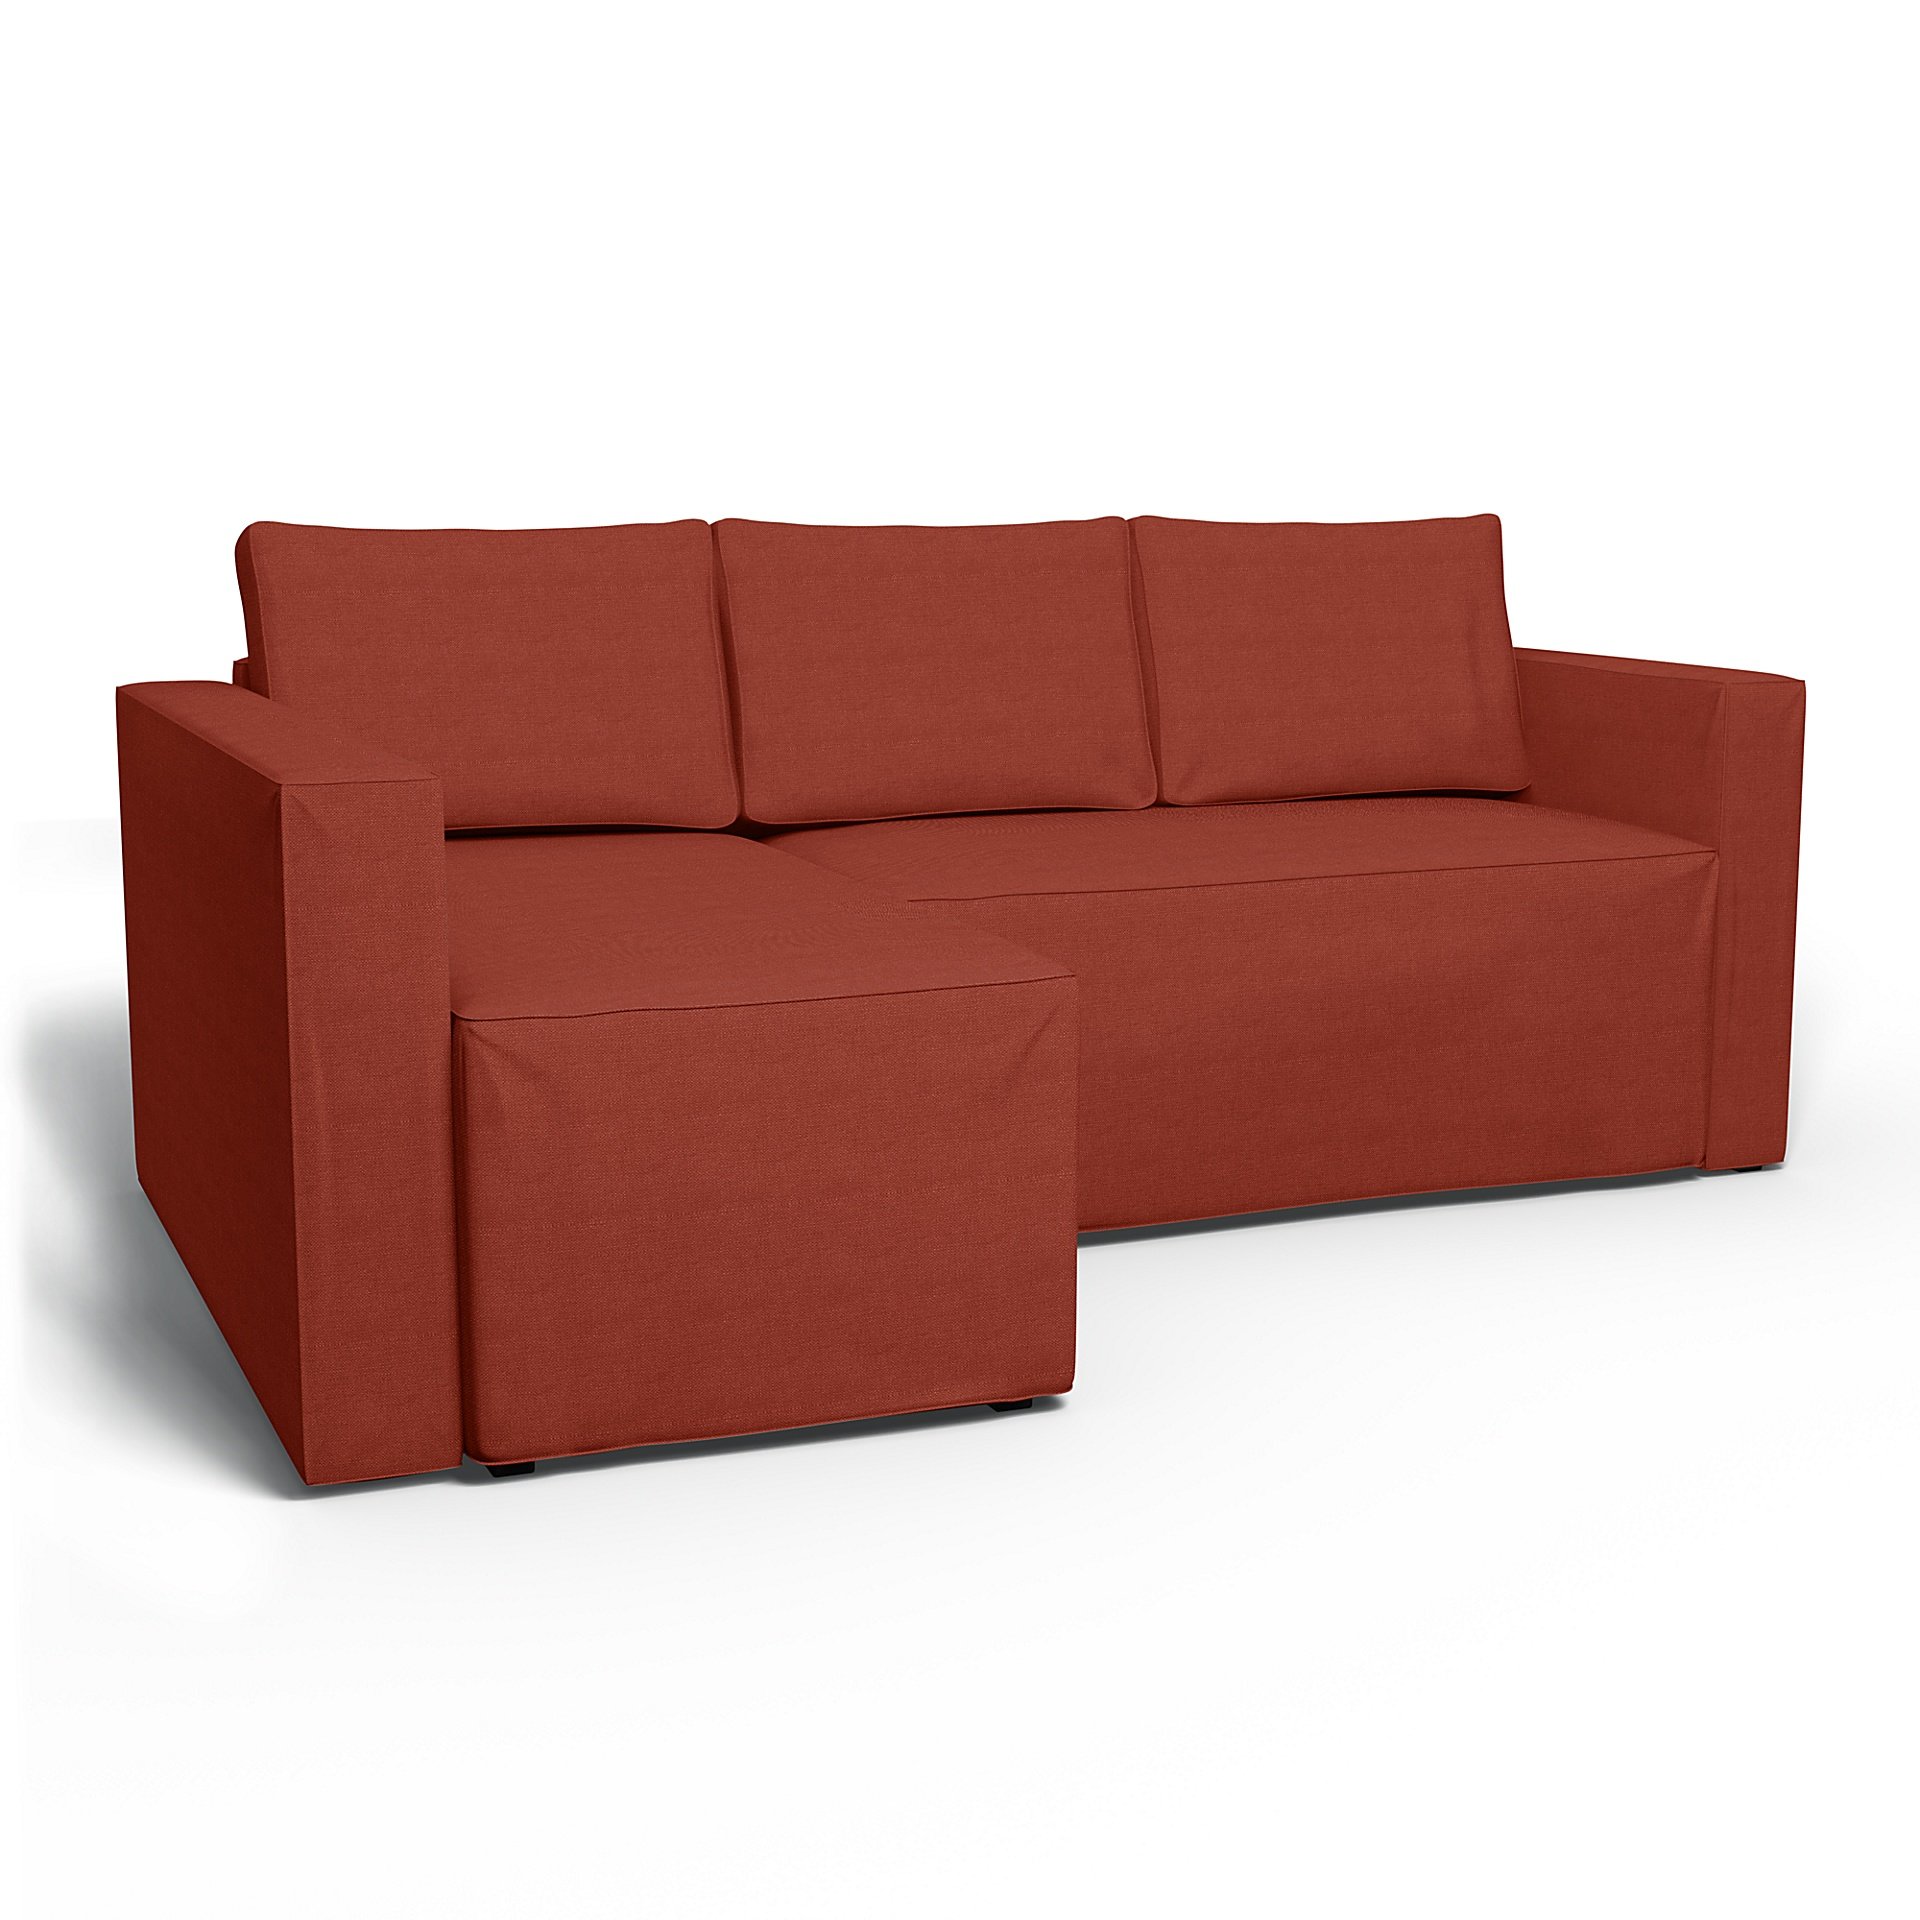 IKEA - Manstad Sofa Bed with Left Chaise Cover, Cayenne, Linen - Bemz